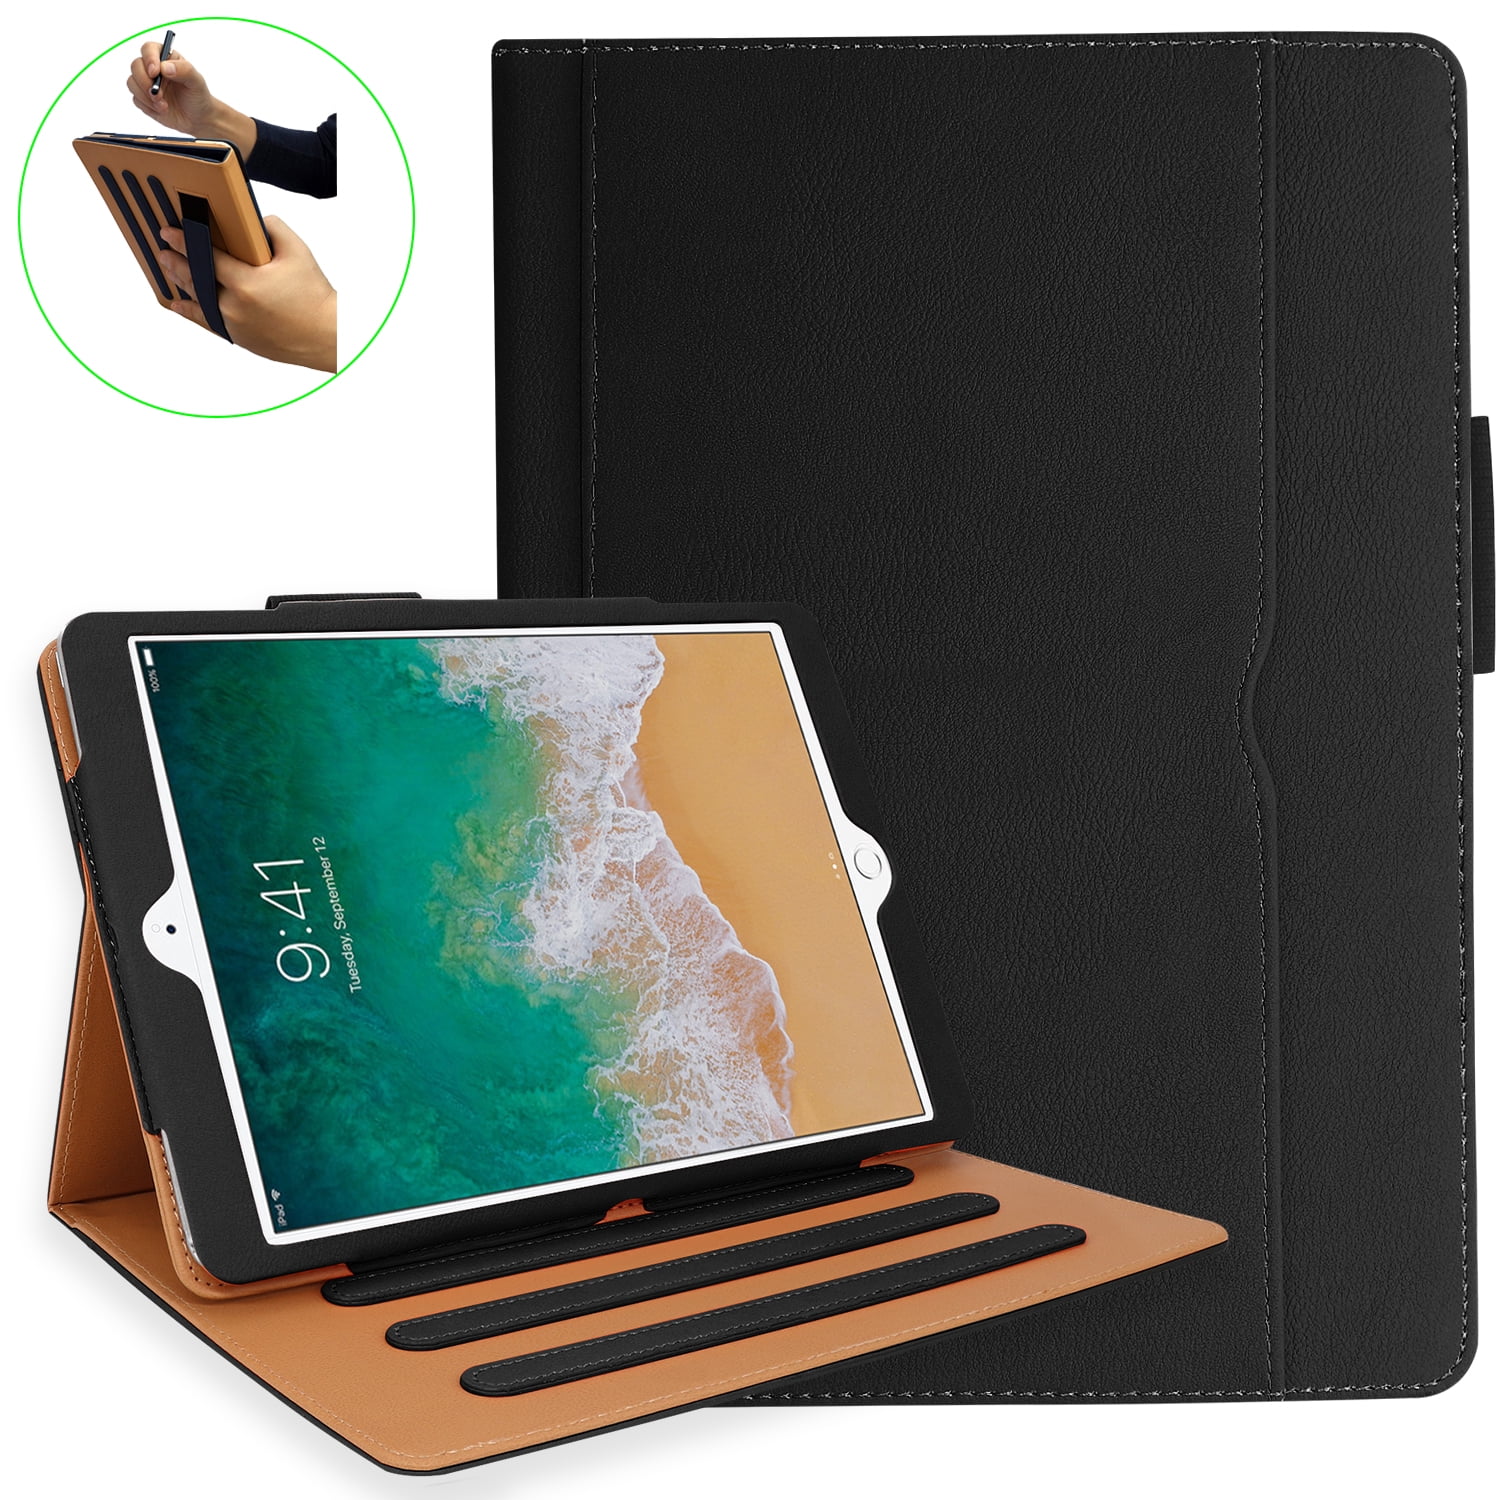 iPad Air 5th/4th Generation Case 2022/2020, iPad 10.9 Case Cover with Pencil  Holder - Multi-Angle Stand, Hand Strap, Auto Sleep/Wake for iPad Air 5th/4th  Gen 10.9 Inch 